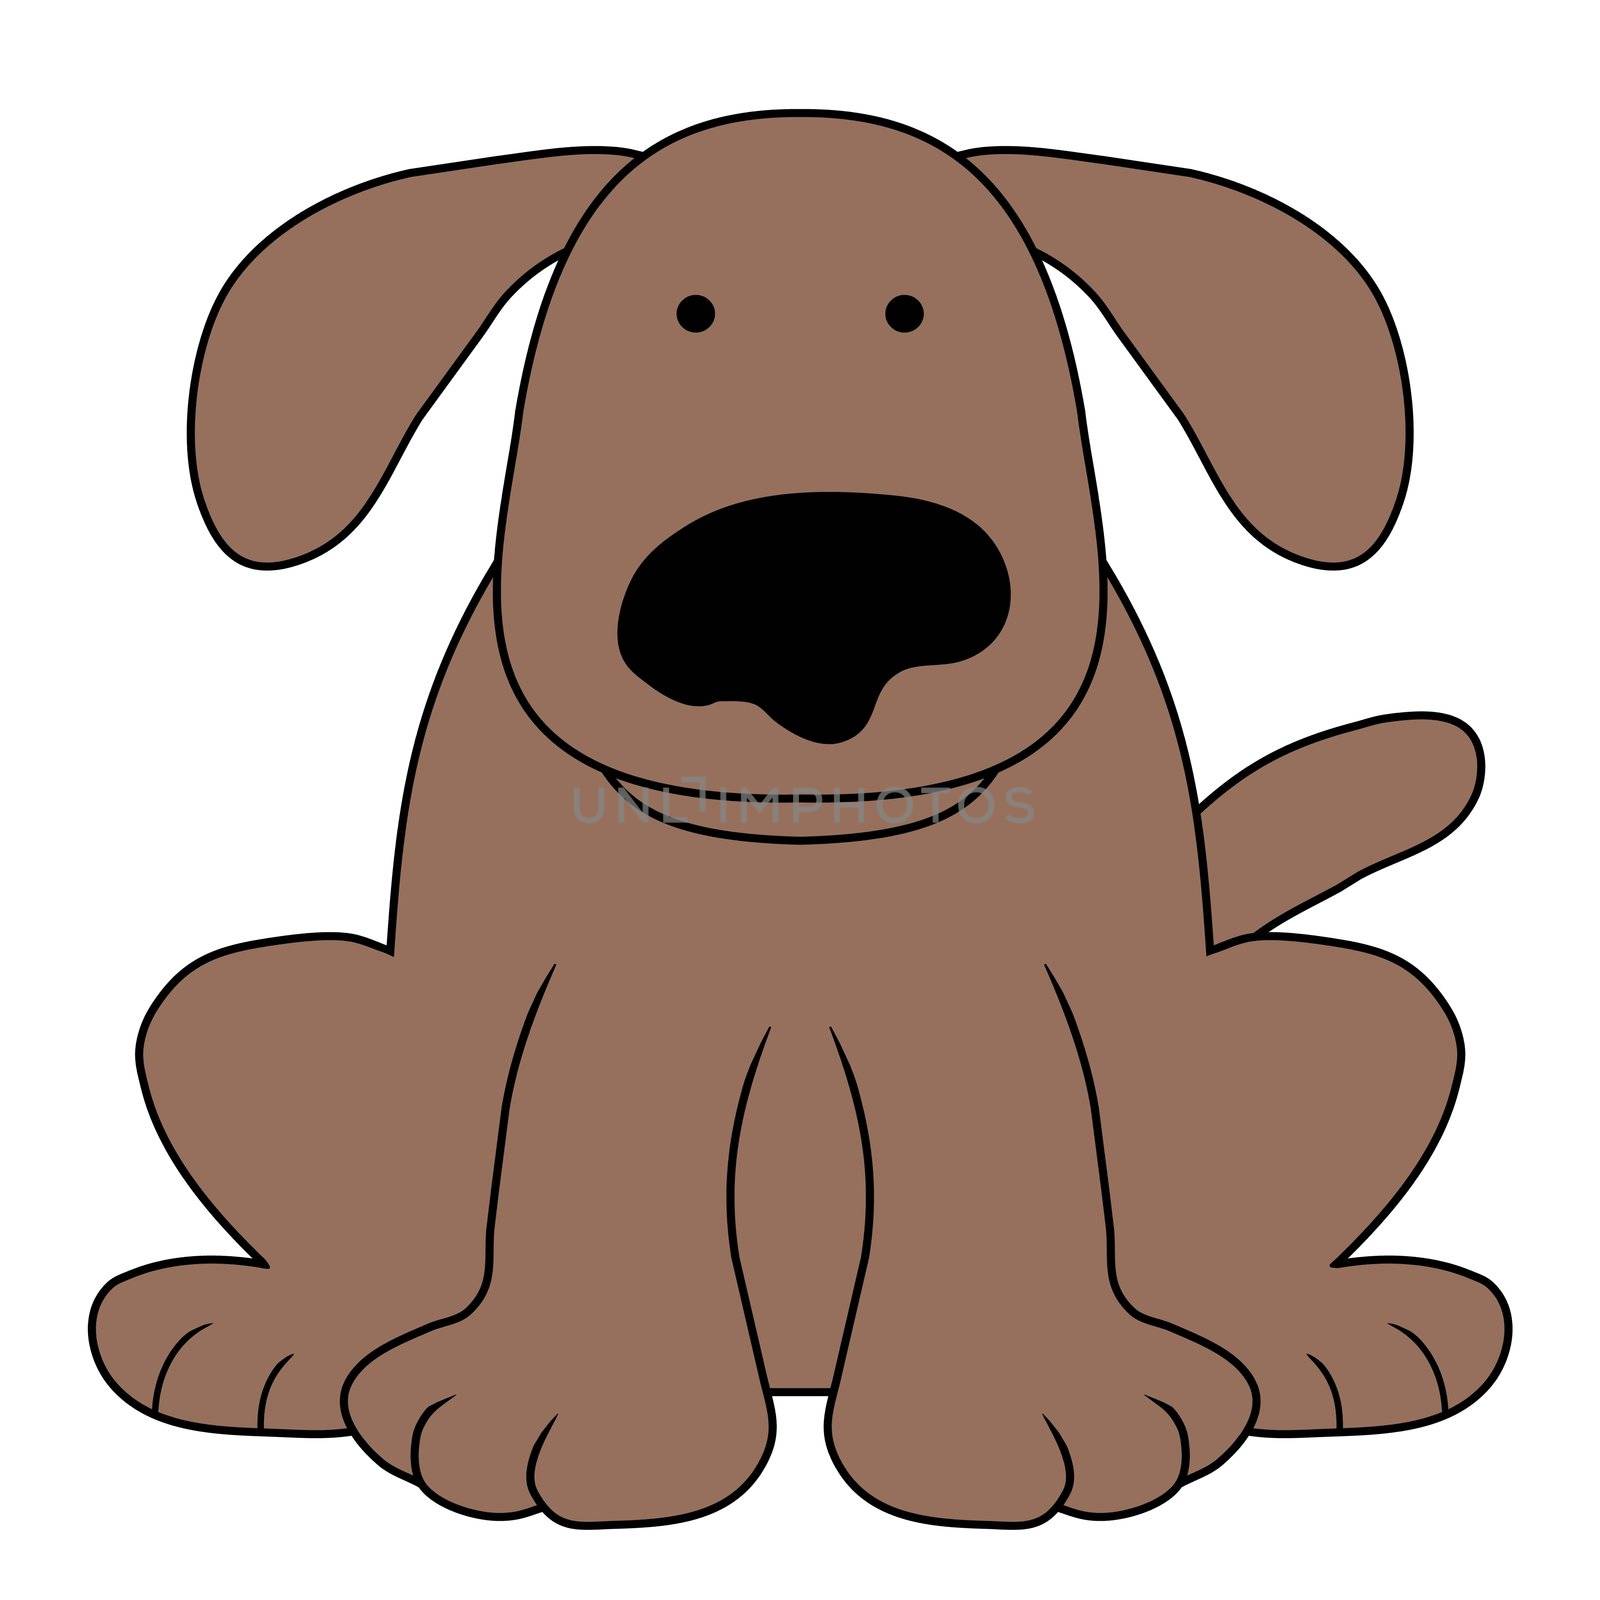 Illustration of an isolated dog